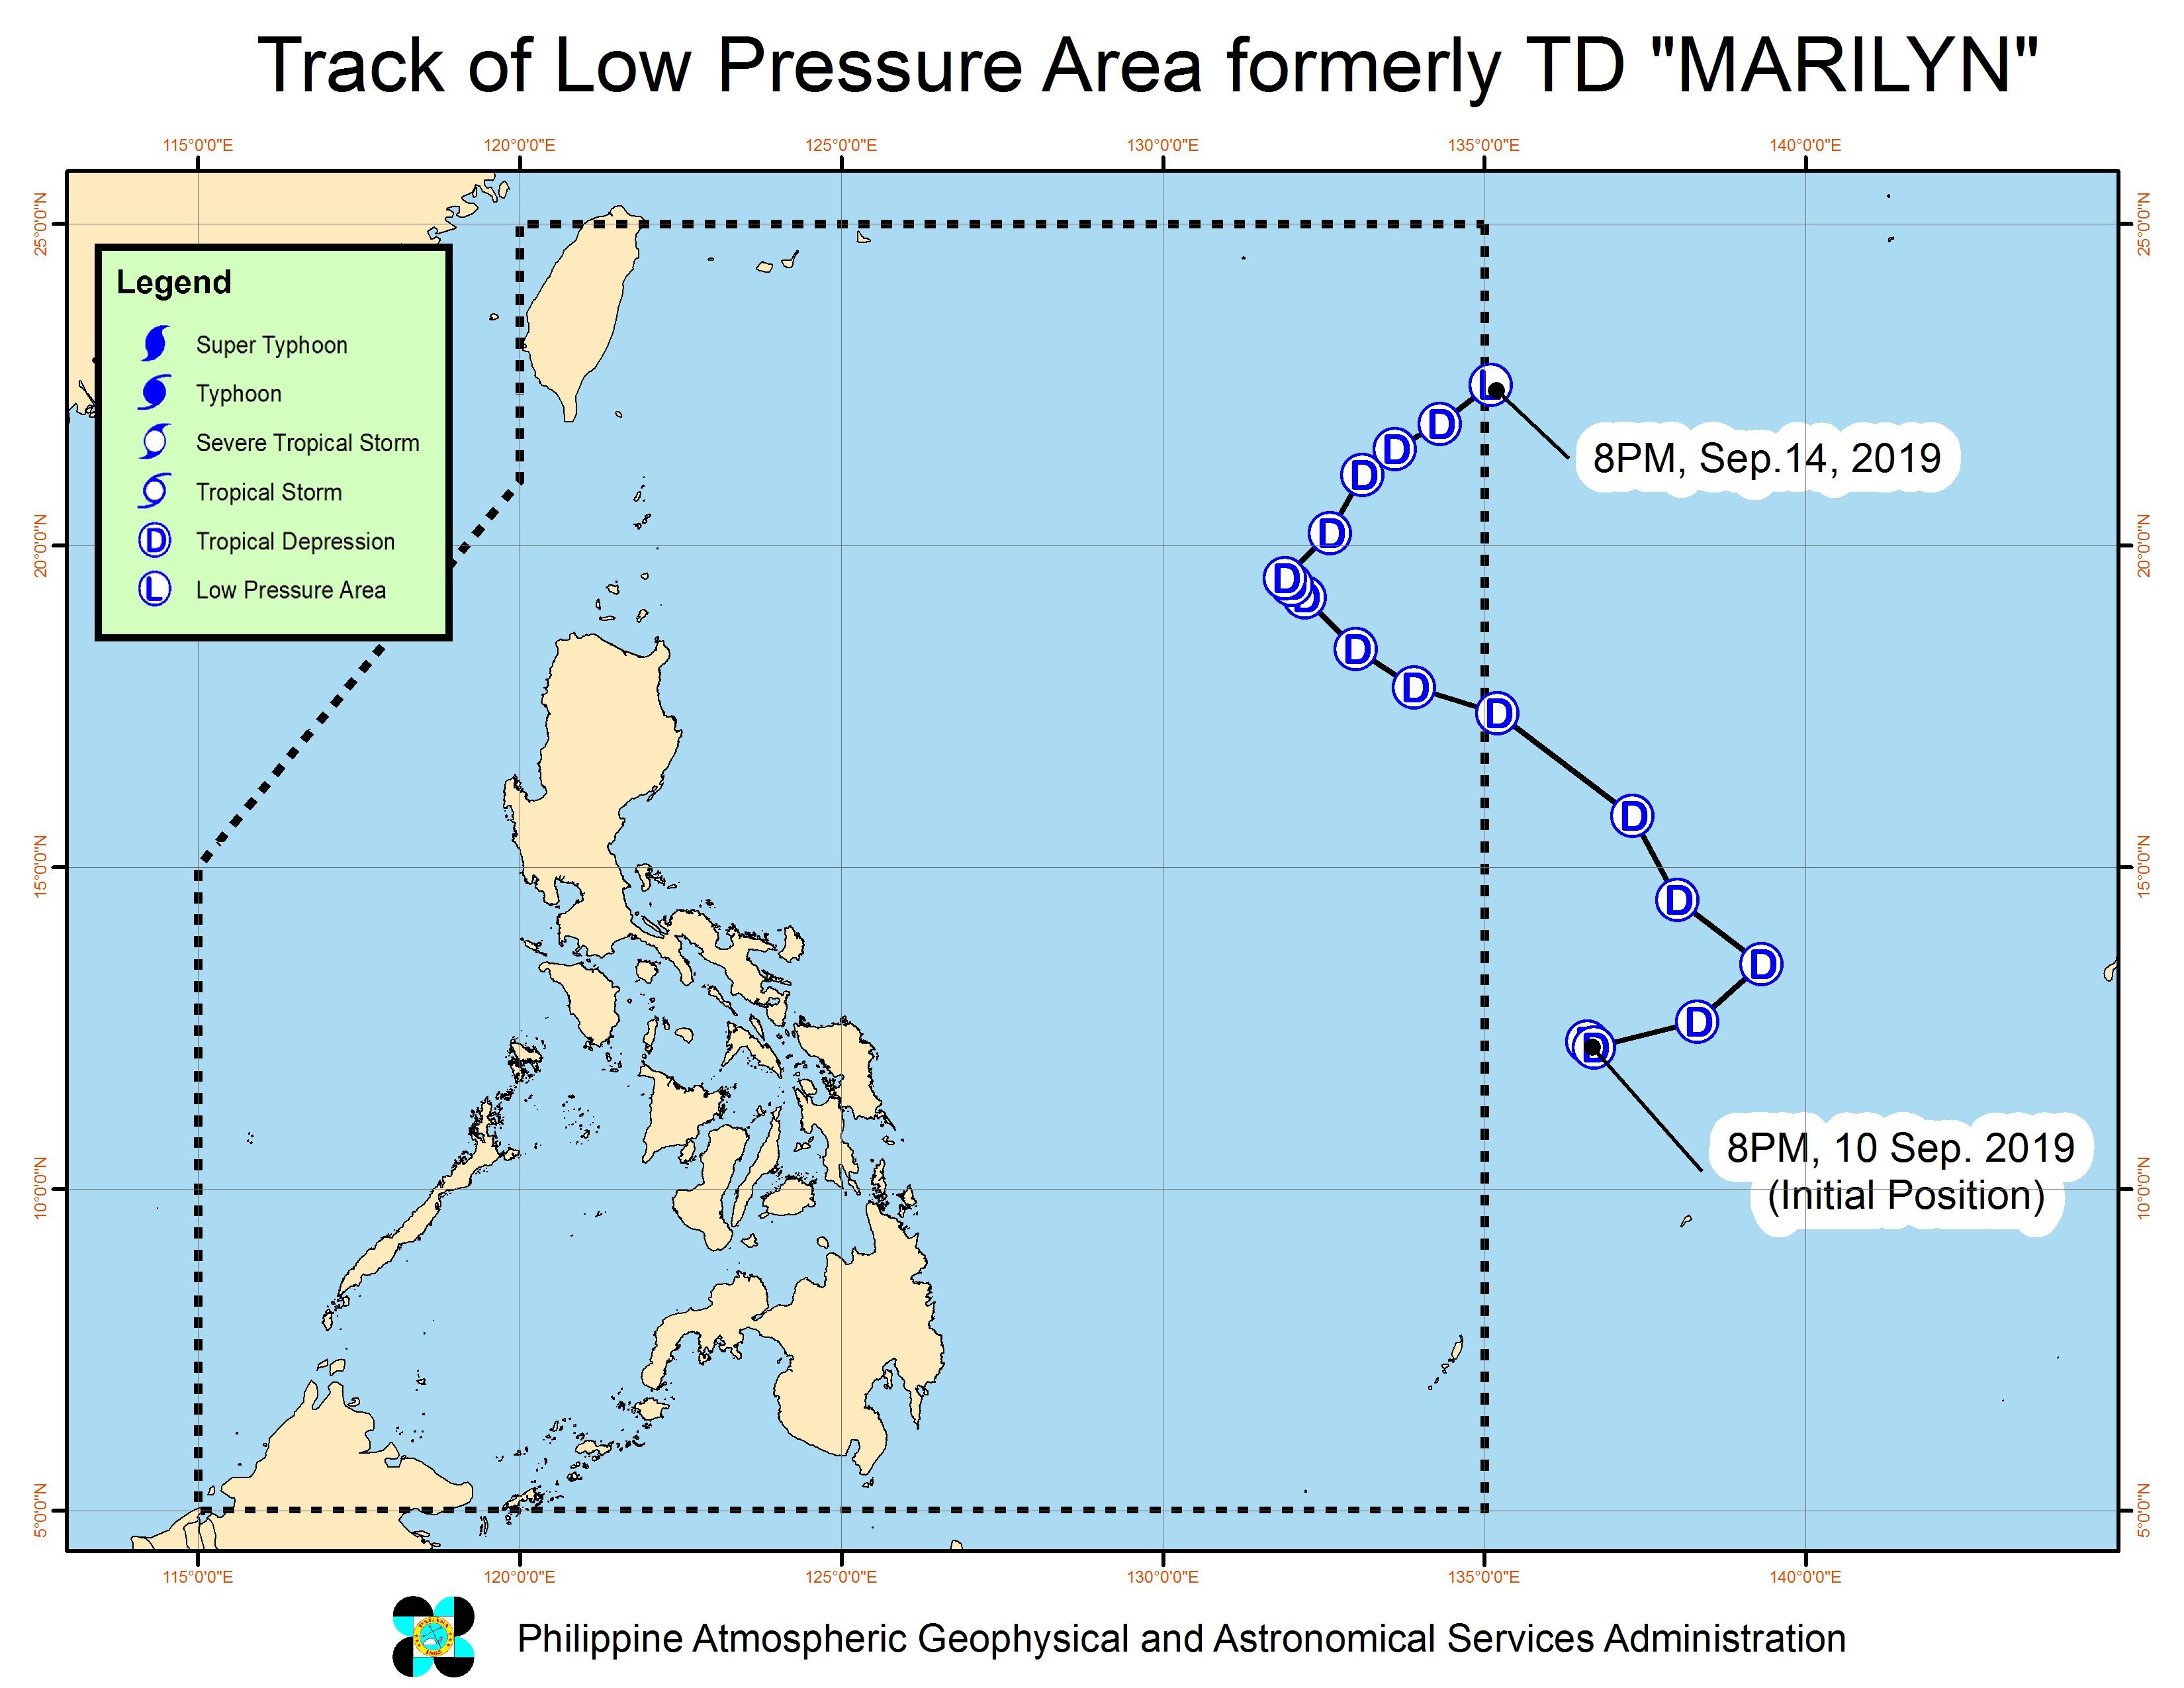 Forecast track of the low pressure area which used to be Tropical Depression Marilyn, as of September 14, 2019, 11 pm. Image from PAGASA 